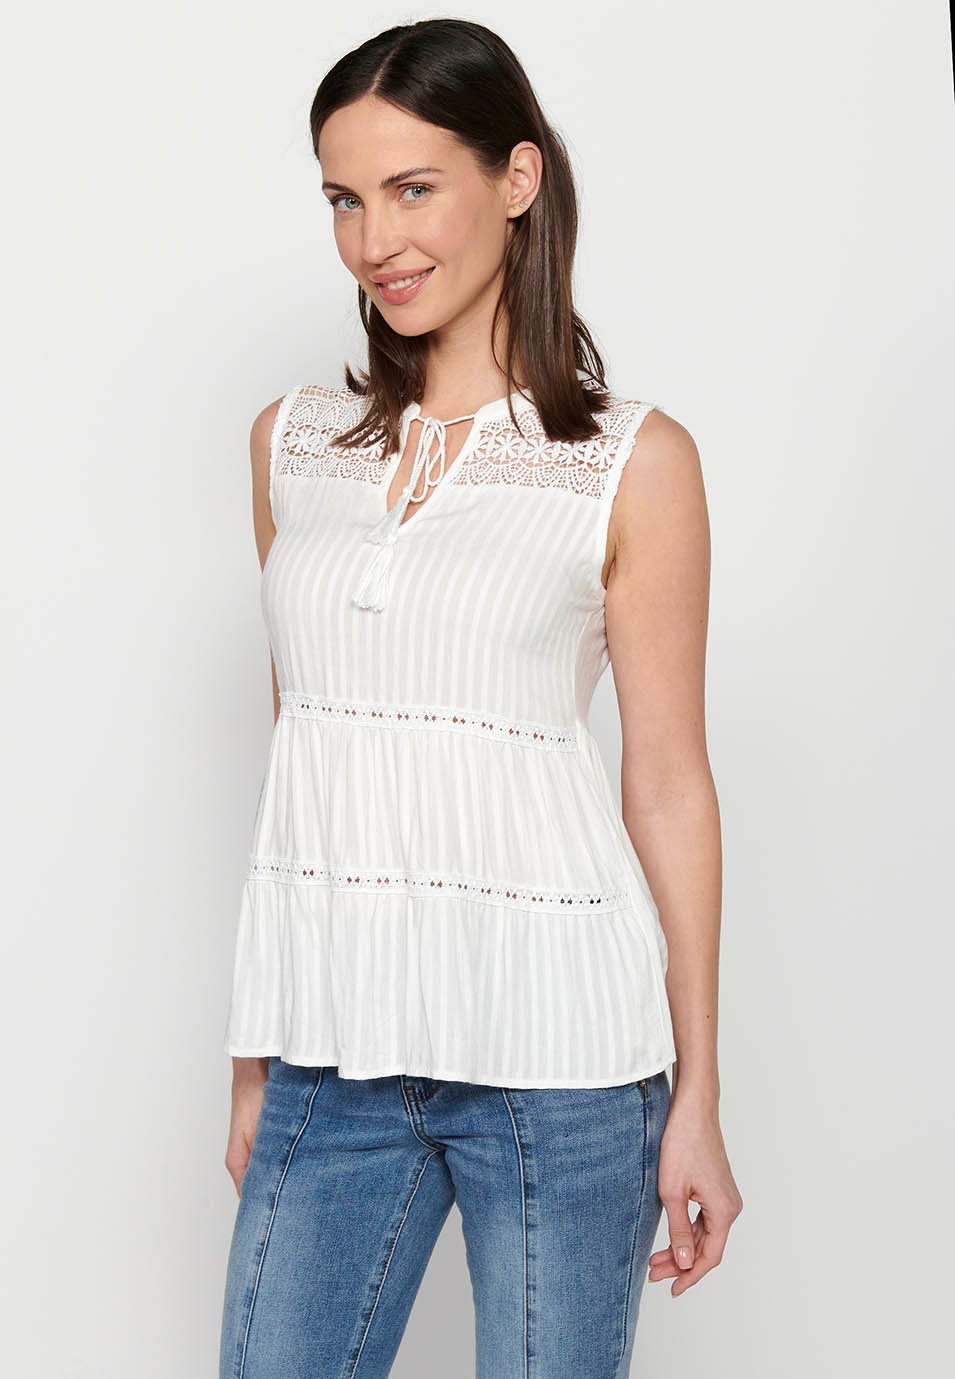 Sleeveless blouse. round neckline with opening, white color for women